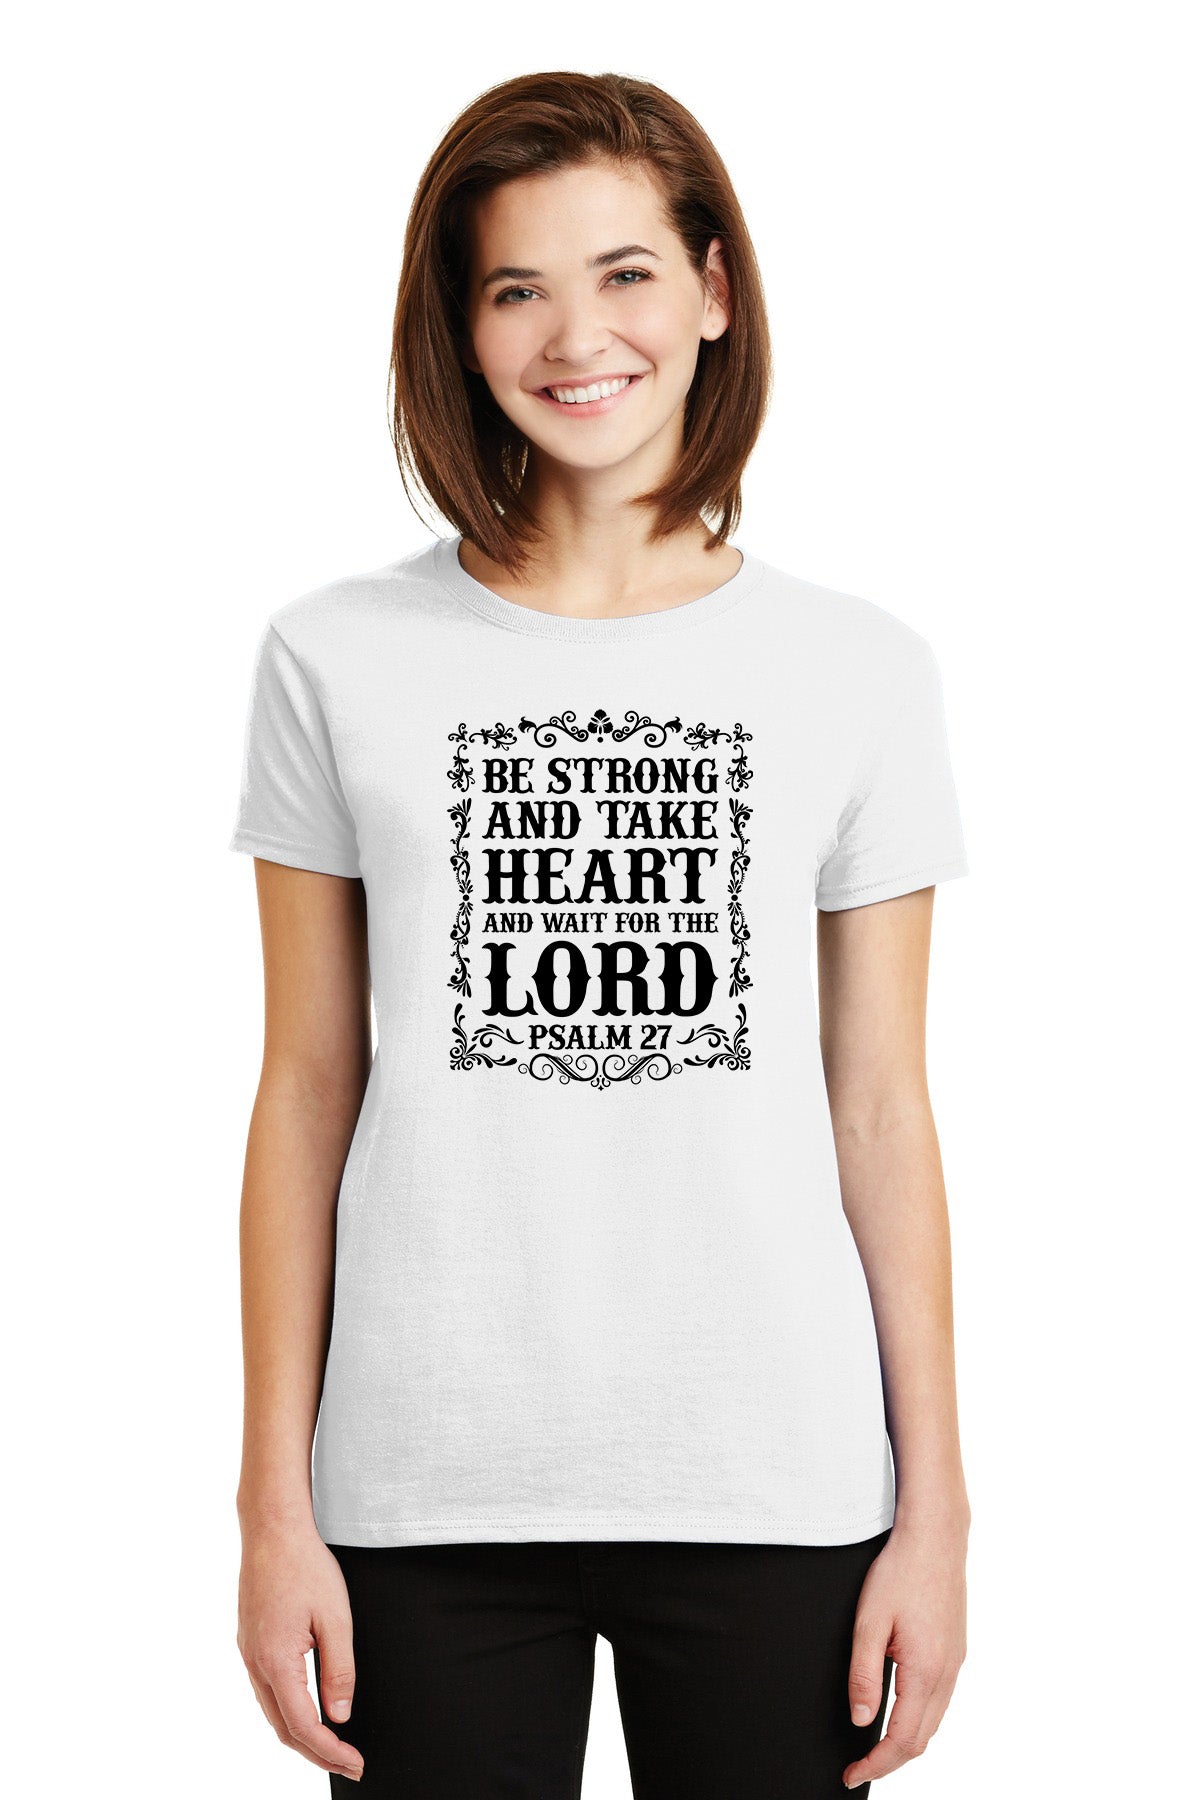 Be Strong and Take Heart and Wait for the Lord Psalm 27 T-Shirt